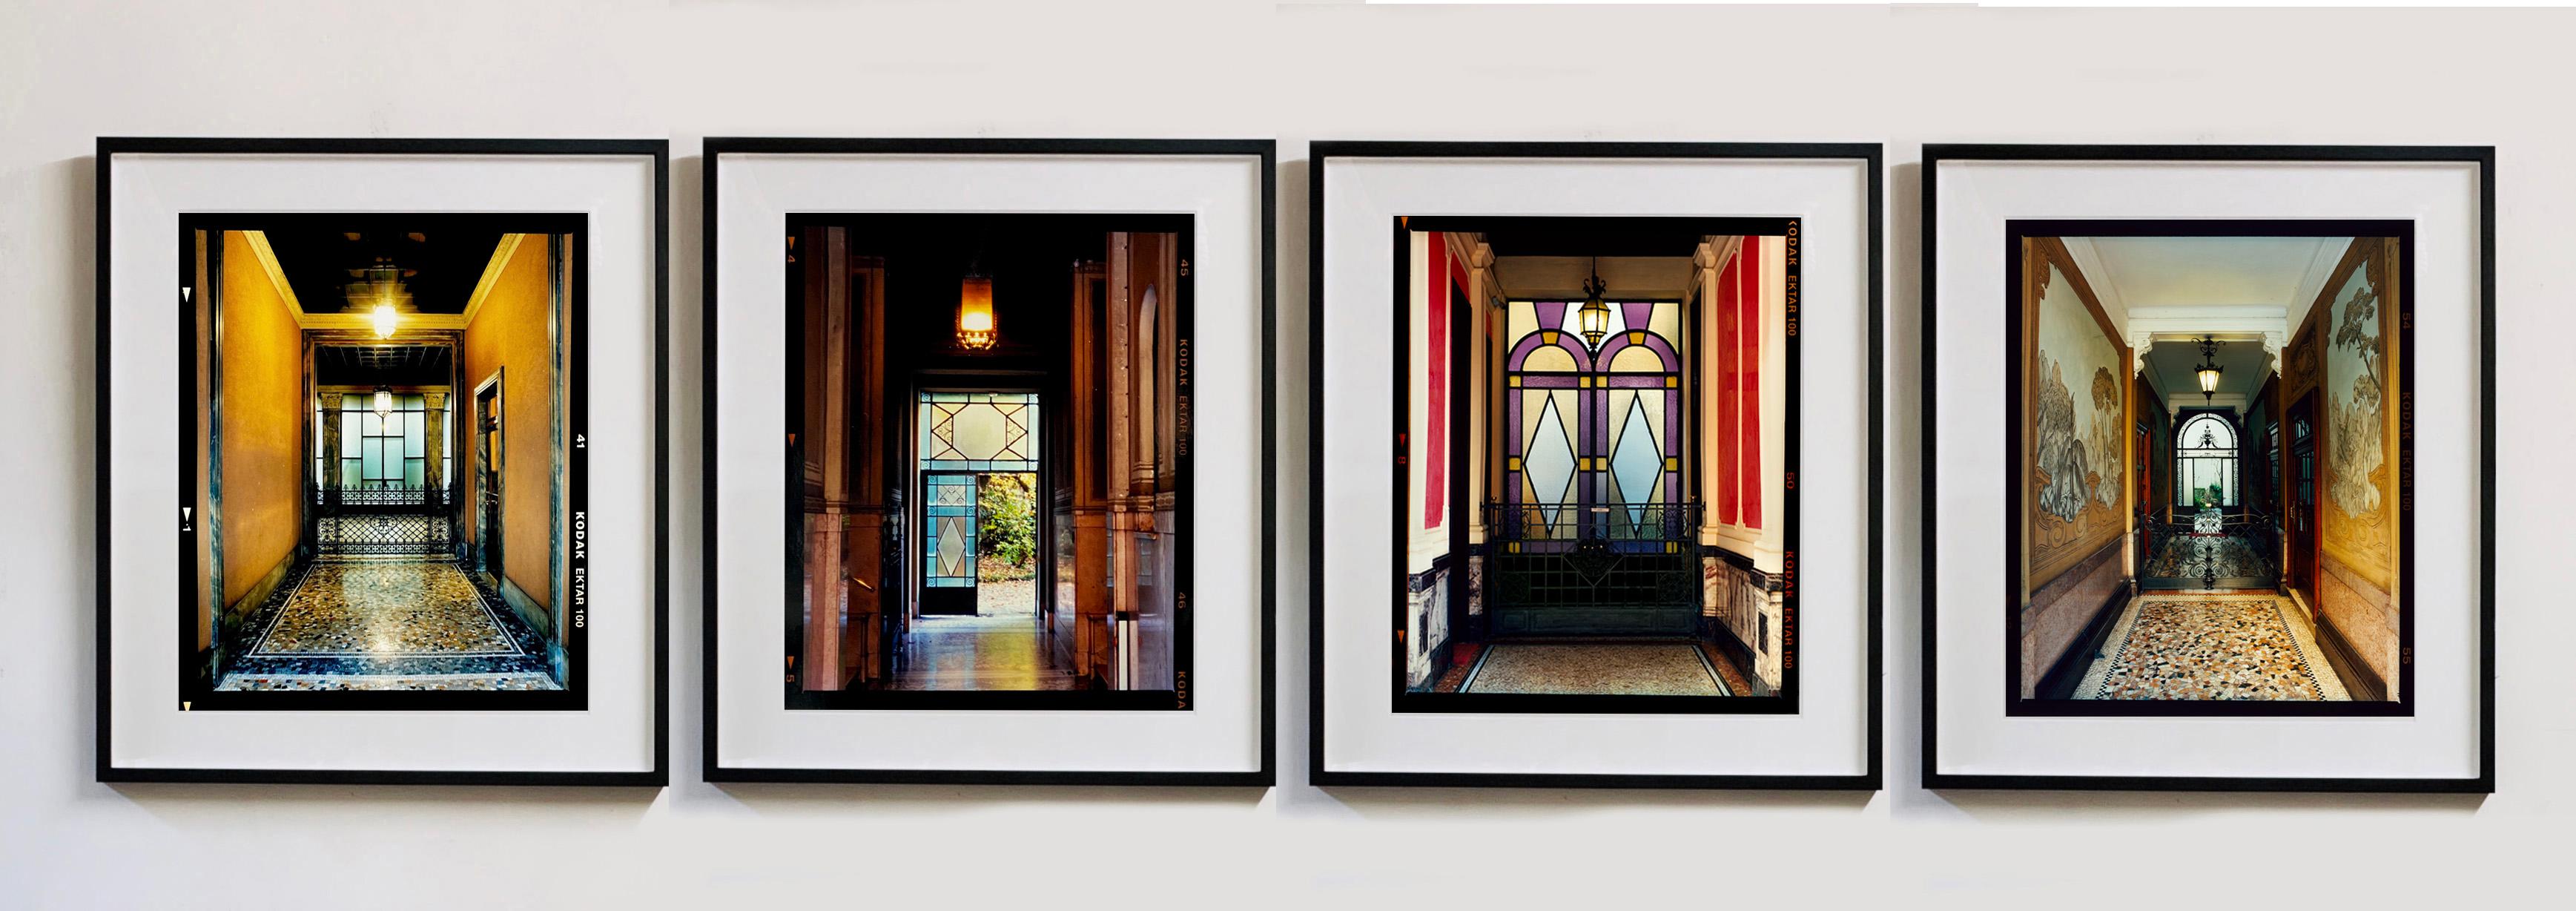 Foyer VII, Milan - Italian architectural color photography For Sale 4